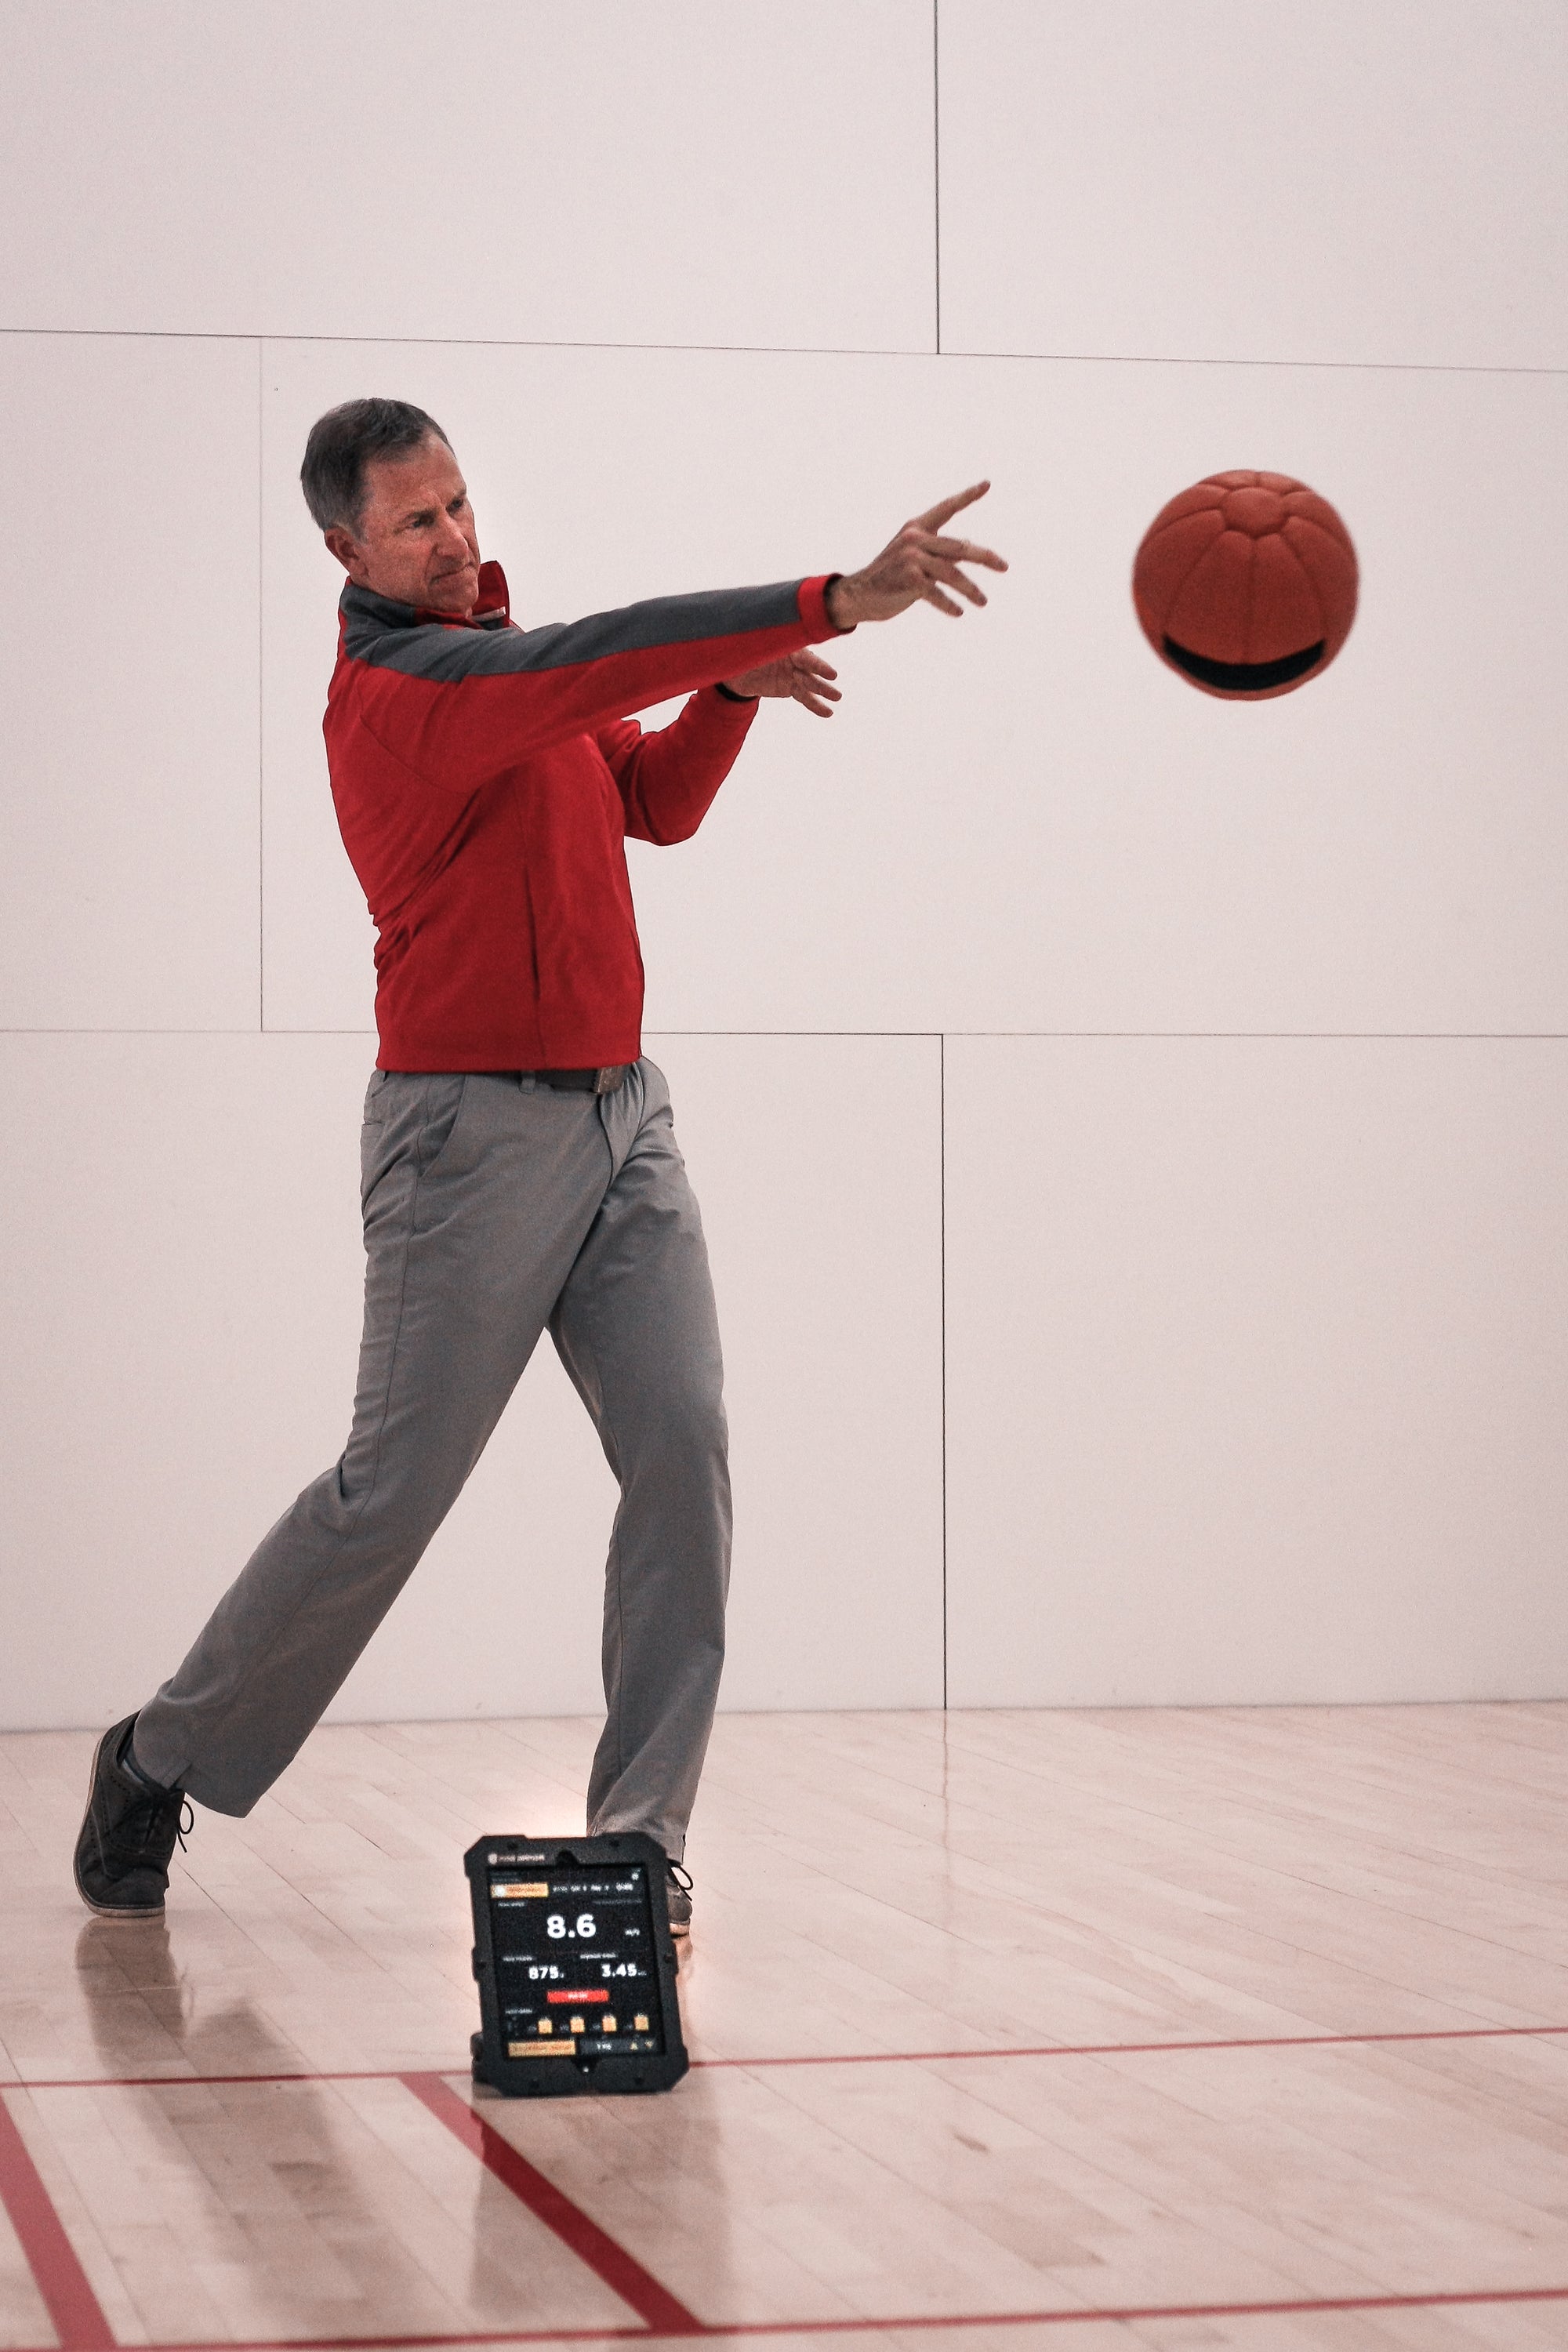 Ballastic Ball velocity based training products for physical therapy